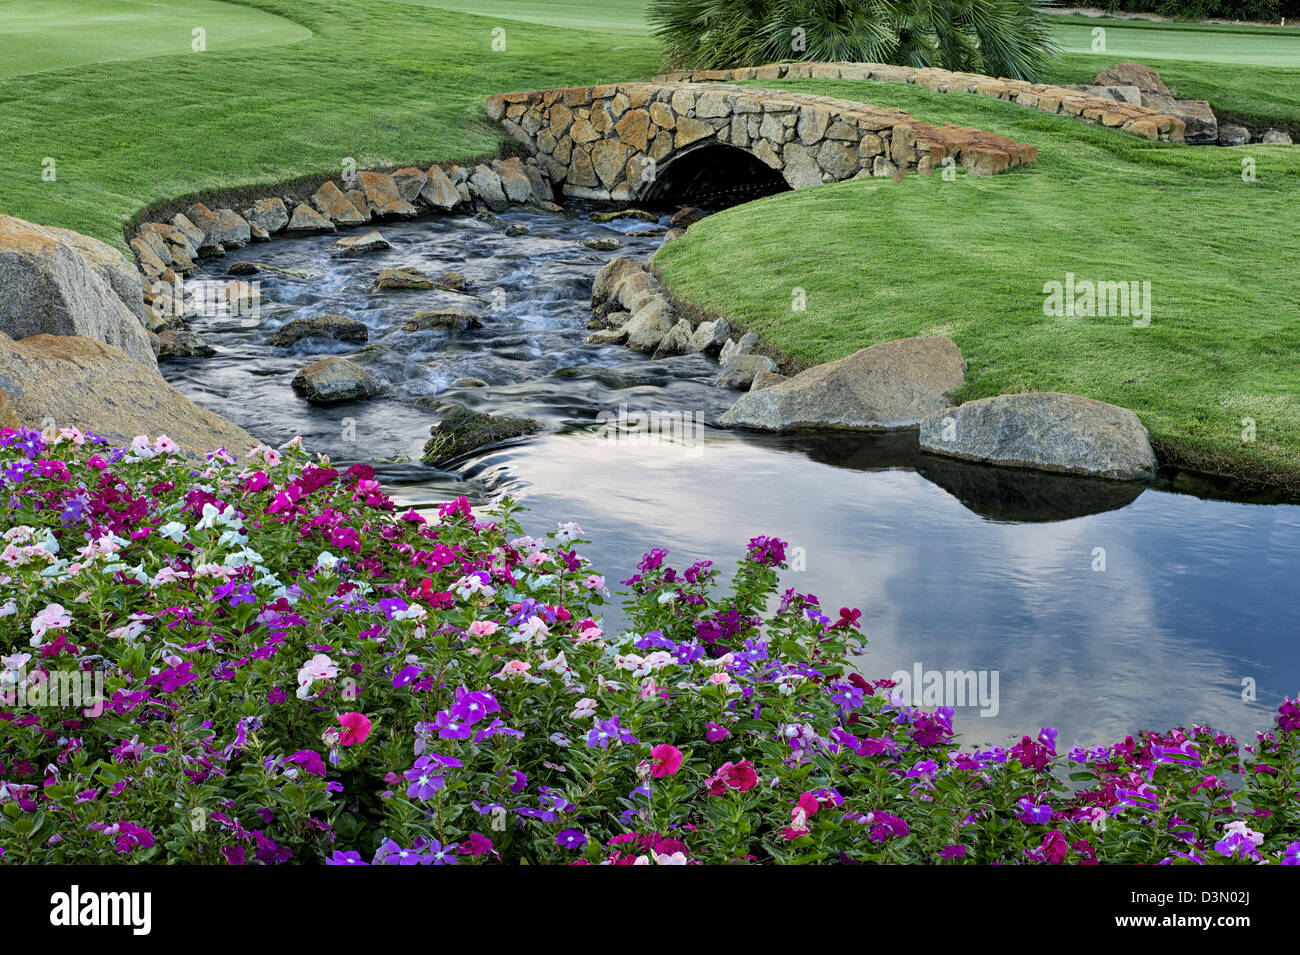 Stream and impatiens flowers with bridge at gof course. Palm desert, California Stock Photo